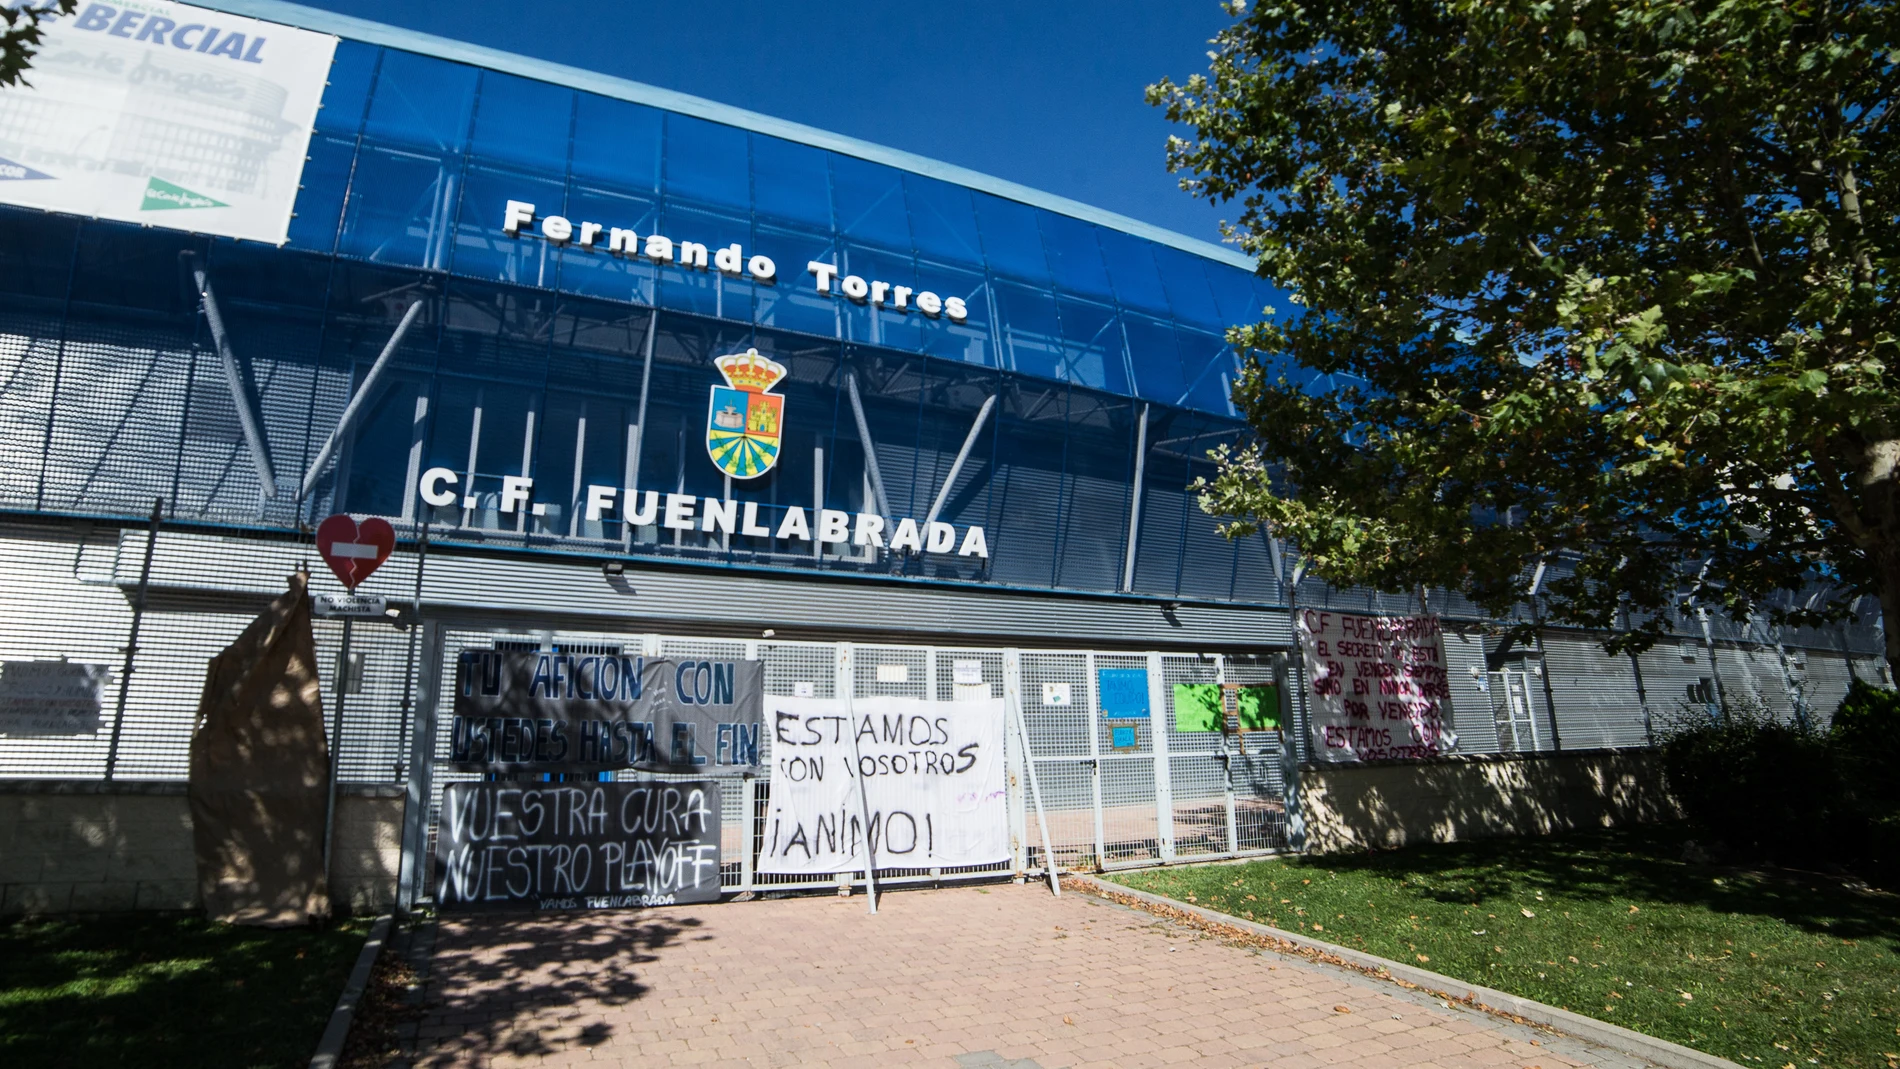 Banners in support of the players of CF Fuenlabrada